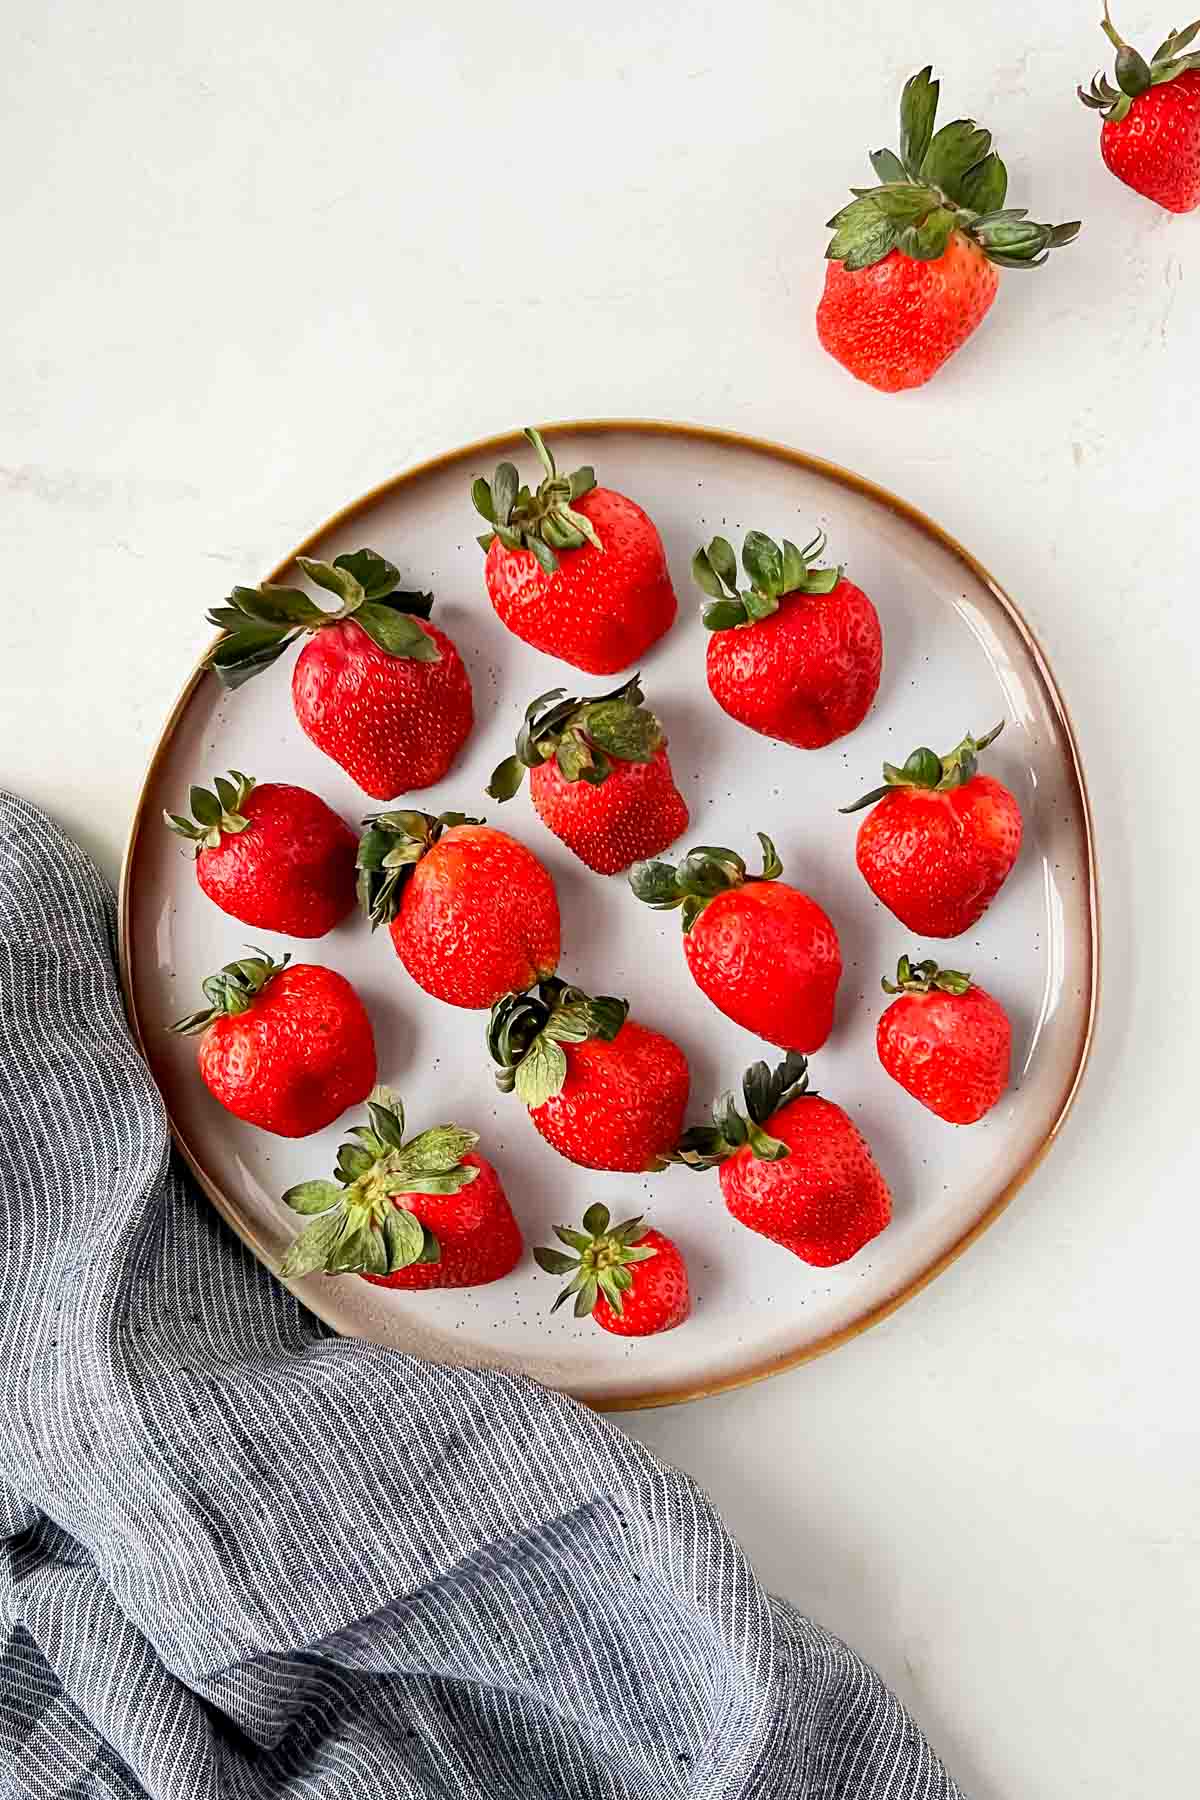 champagne soaked strawberries aligned on white plate.